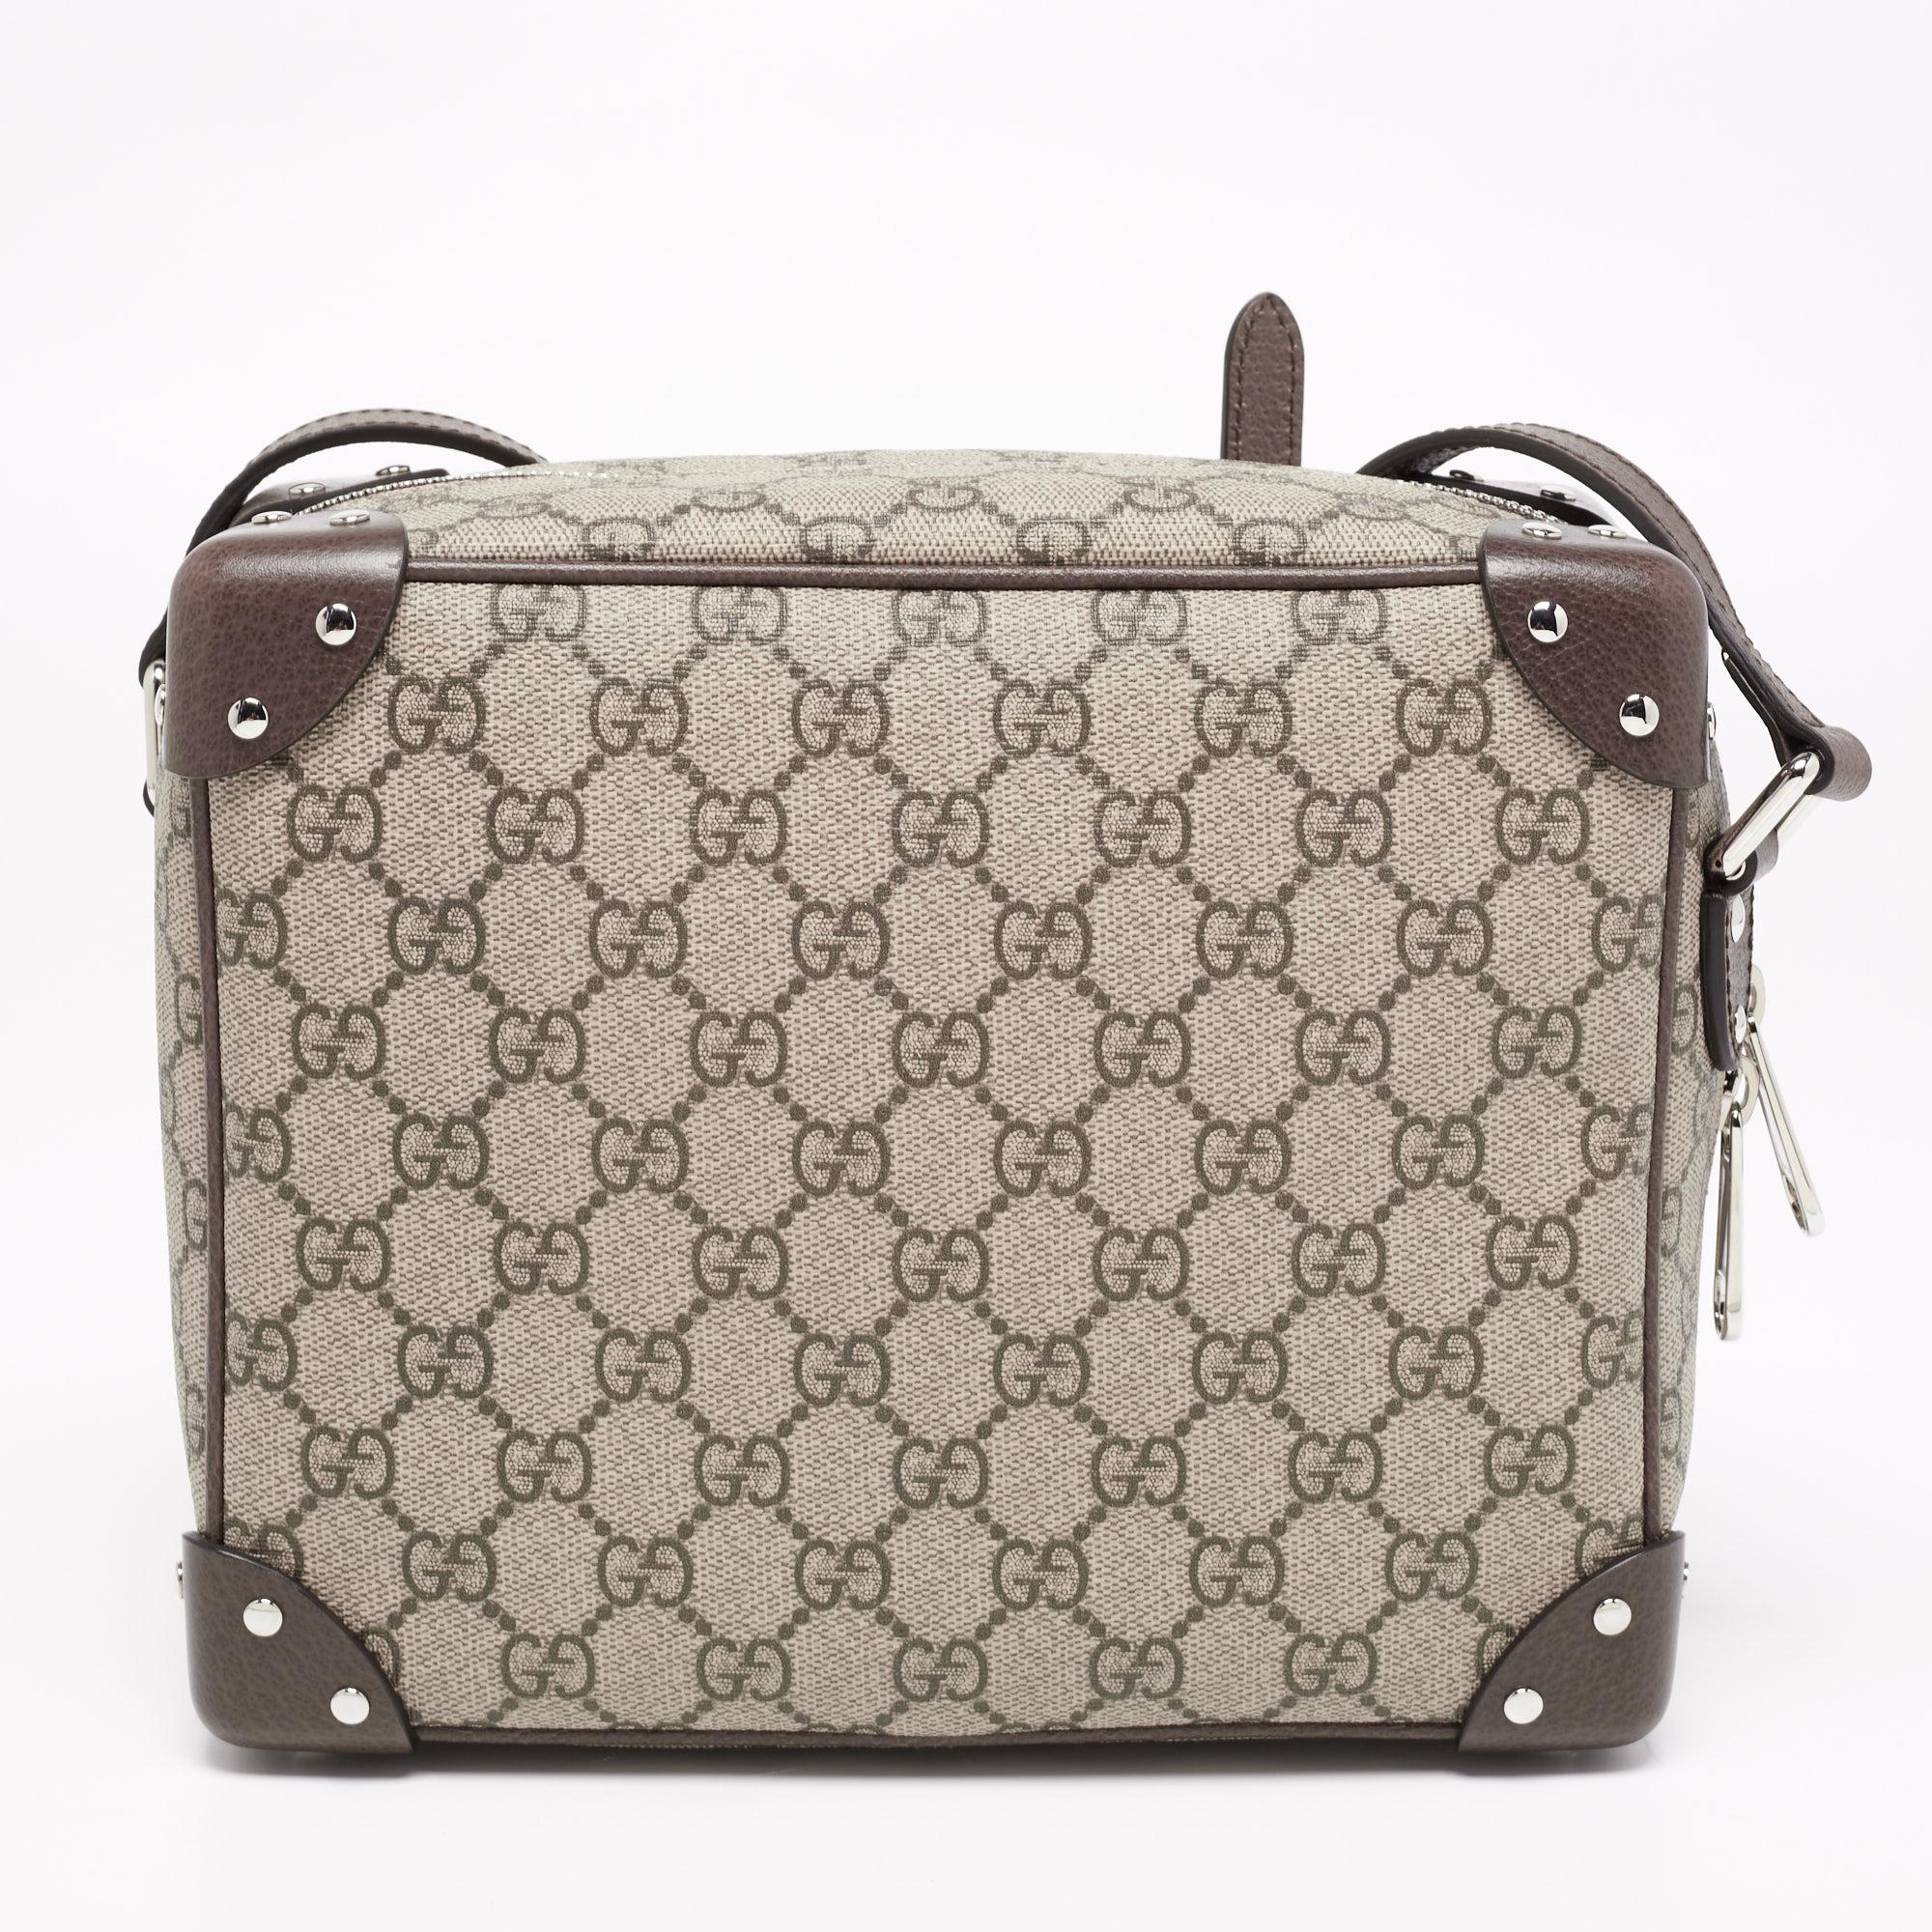 This Square messenger bag from the House of Gucci is absolutely classy and practical! Made from brown-beige GG Supreme canvas and leather, this bag features a shoulder strap and silver-tone hardware. Carry this Gucci bag and flaunt a fashion